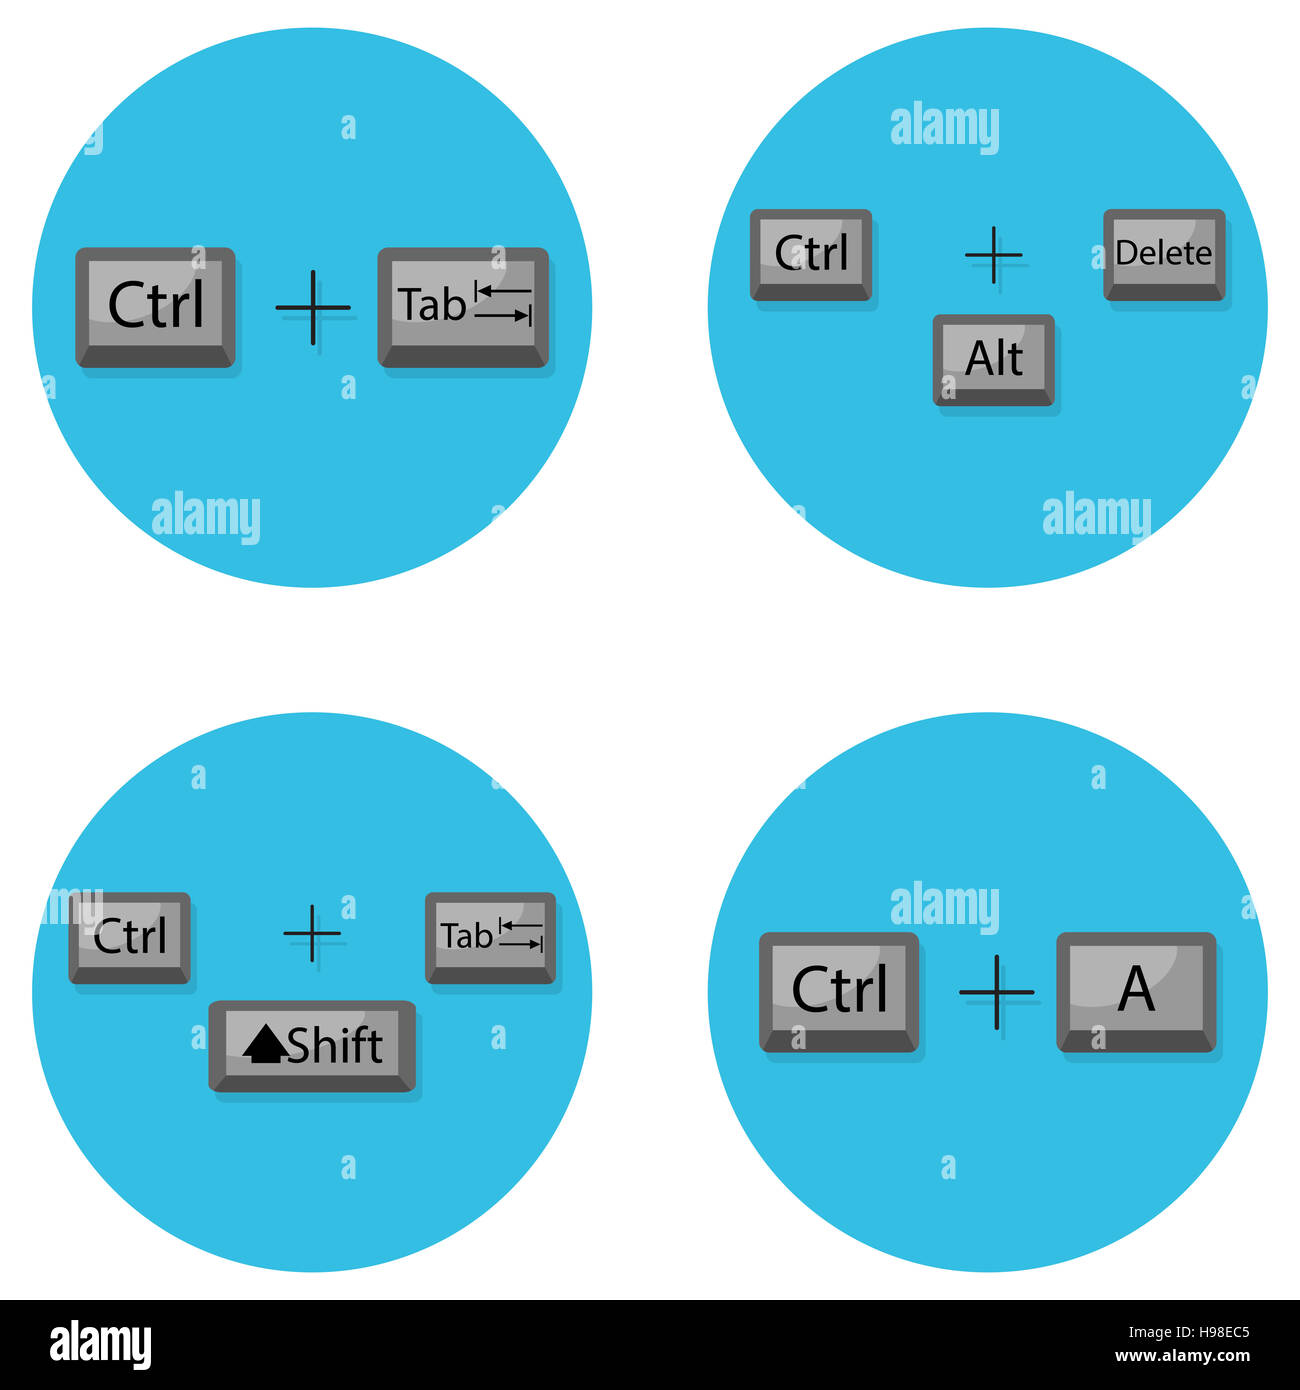 Combination of keyboard hot buttons. Command to computer shift, tab, ctrl. Vector illustration Stock Photo